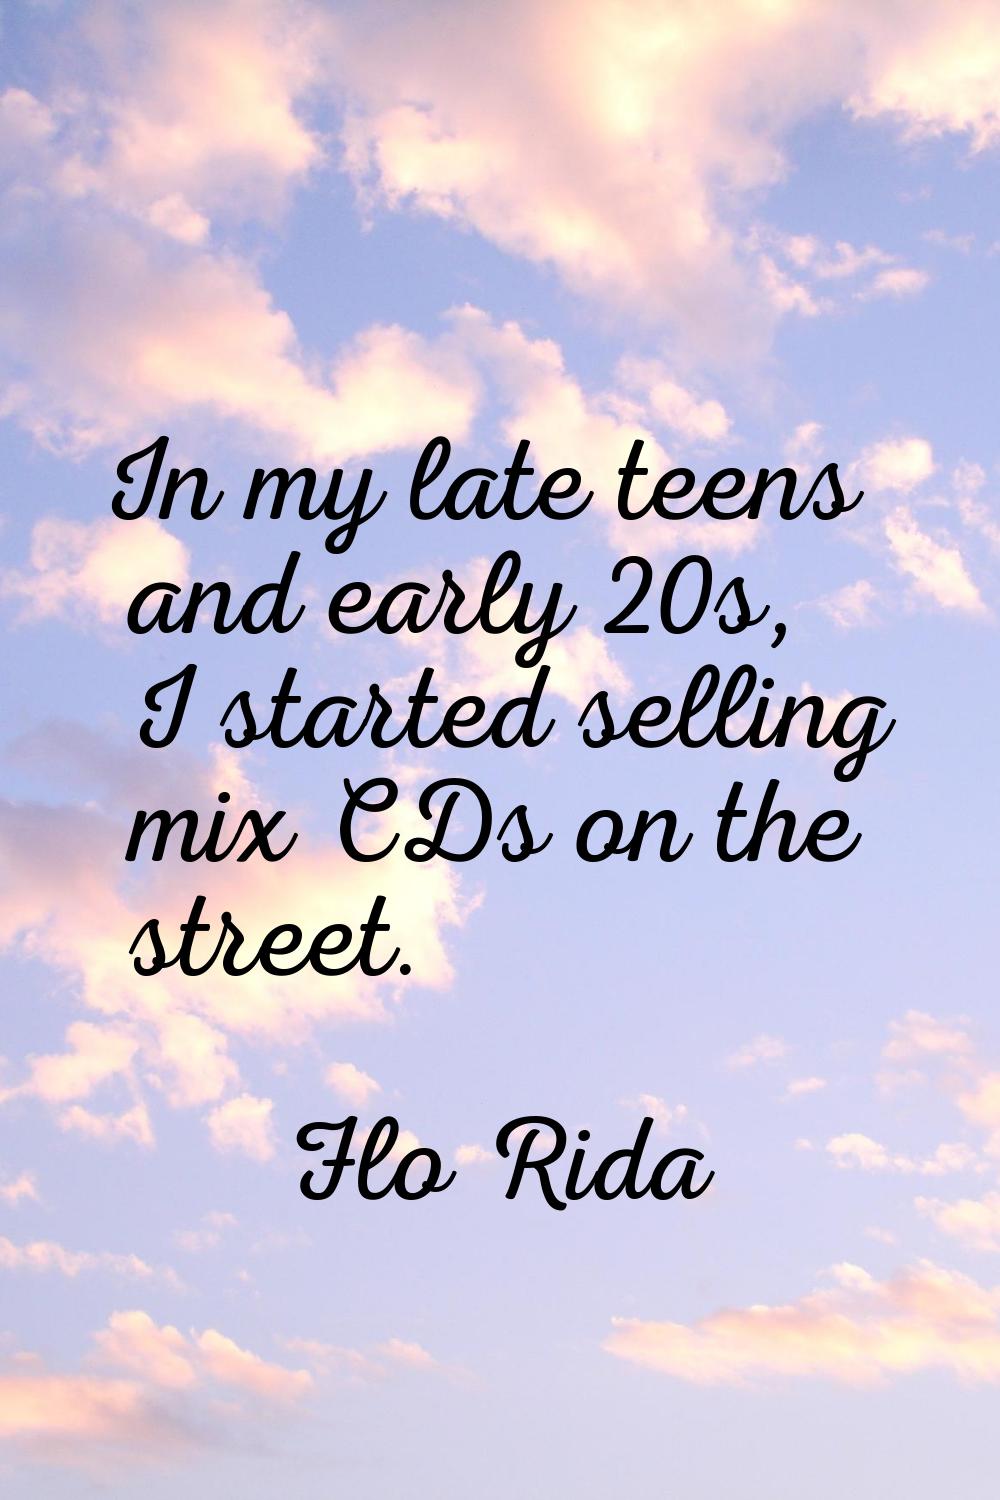 In my late teens and early 20s, I started selling mix CDs on the street.